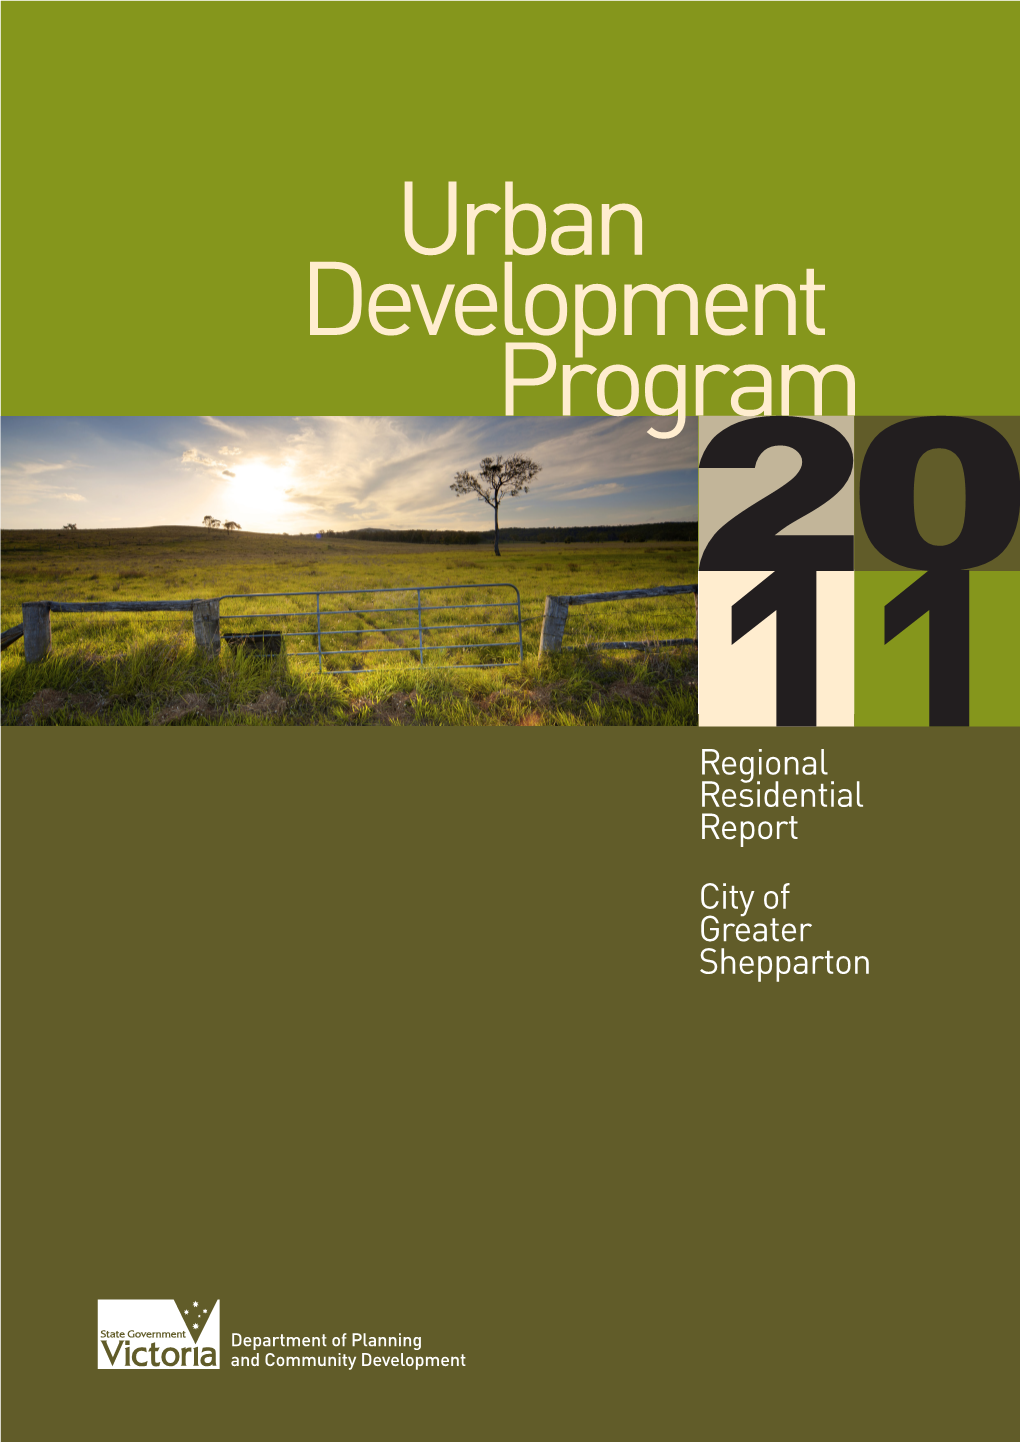 Regional Residential Report City of Greater Shepparton